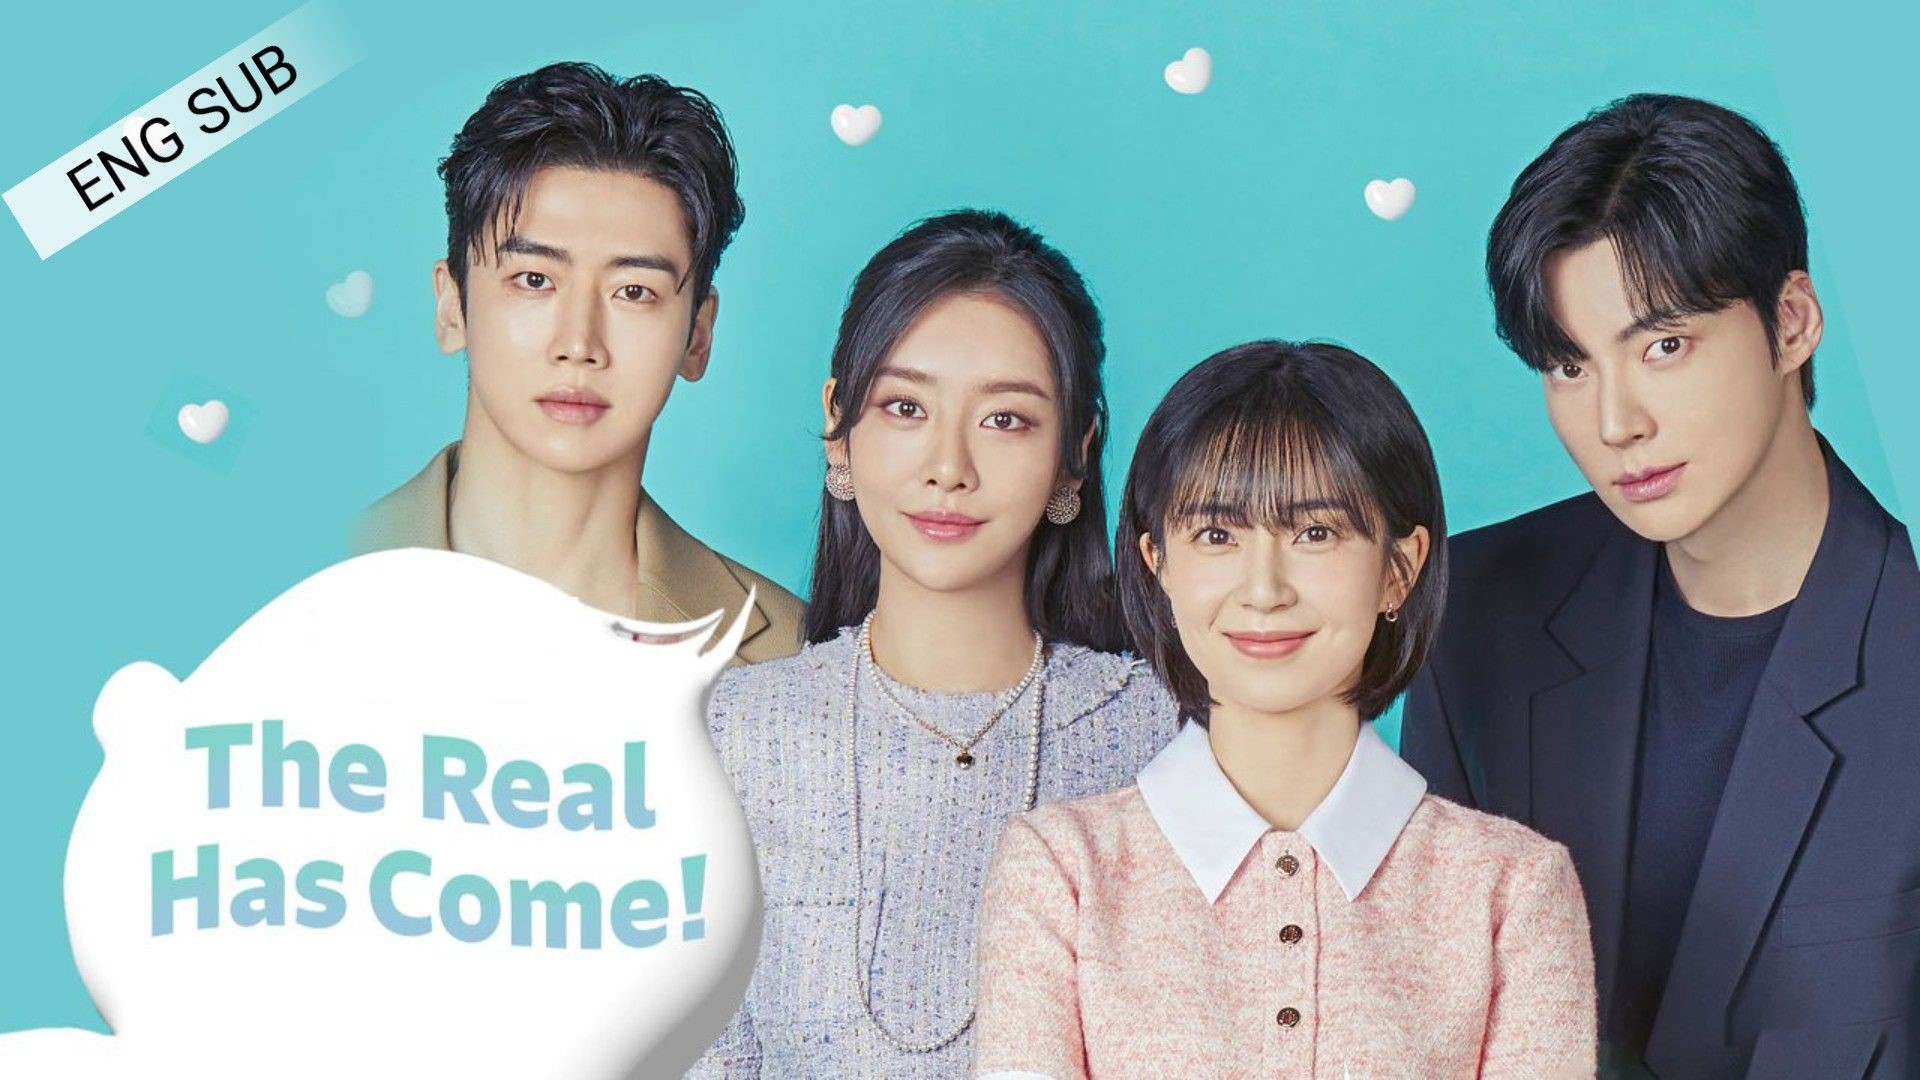 The Real Has Come ep 16 Eng Sub Bilibili kworld trend